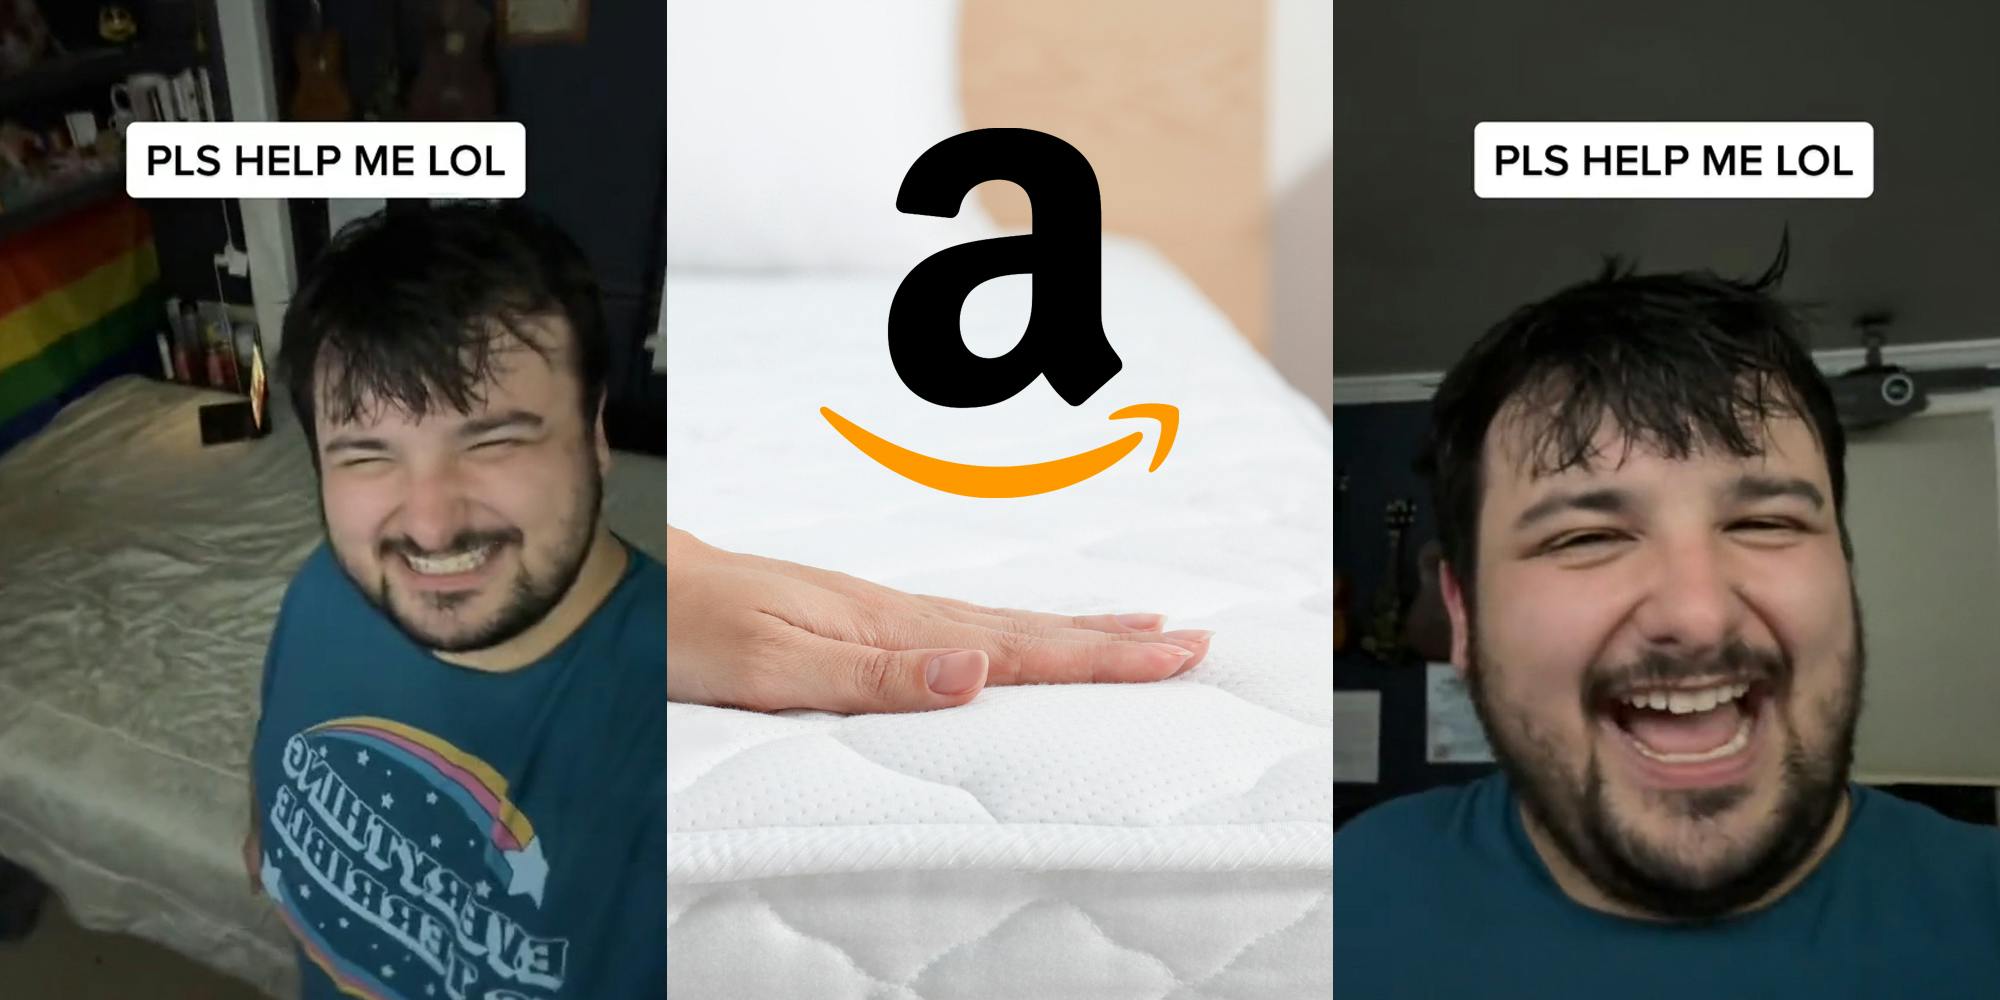 man speaking next to bed caption "PLS HELP ME LOL" (l) hand on mattress with Amazon logo above (c) man speaking caption "PLS HELP ME LOL" (r)